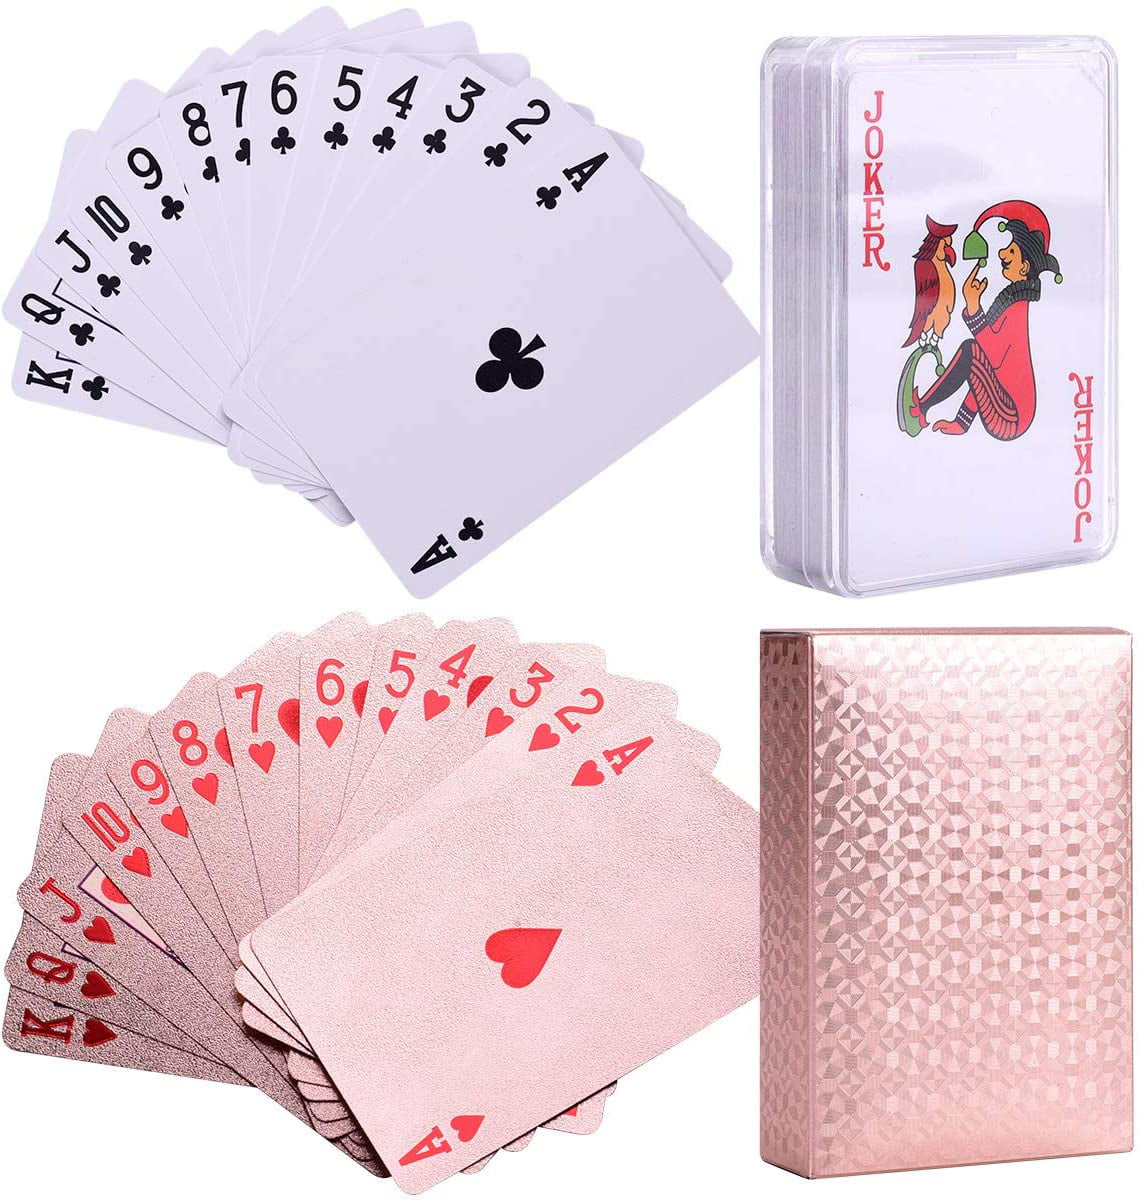 Poker Cards Waterproof Durable Pvc Plastic Playing Cards Novelty Poker Car Fs